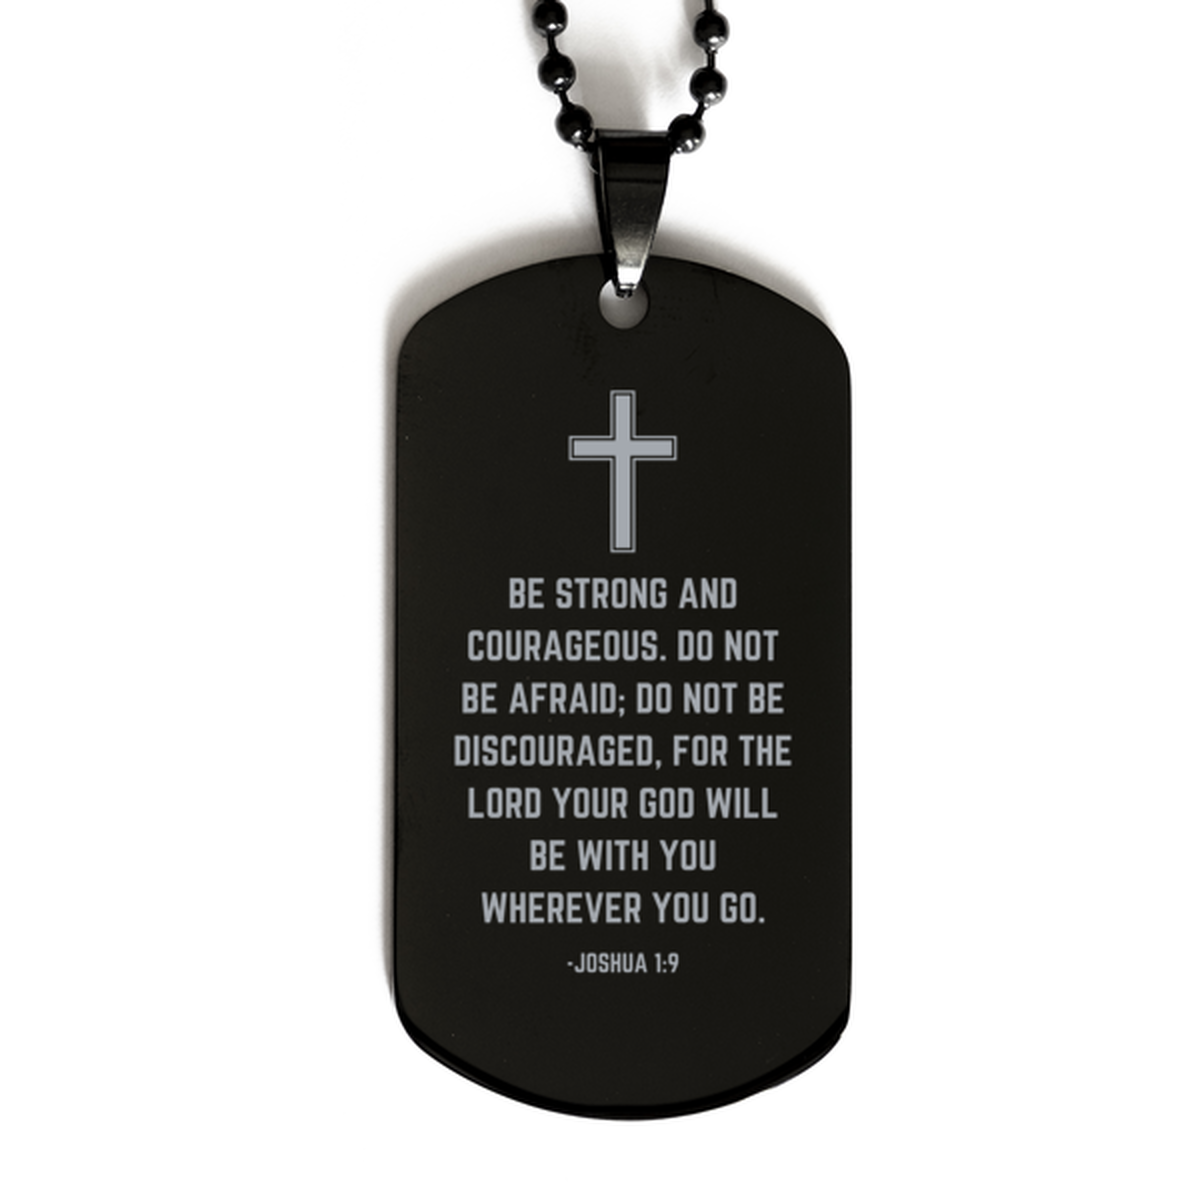 Baptism Gifts For Teenage Boys Girls, Christian Bible Verse Black Dog Tag, For the lord your God will be with you, Confirmation Gifts, Bible Verse Necklace for Son, Godson, Grandson, Nephew